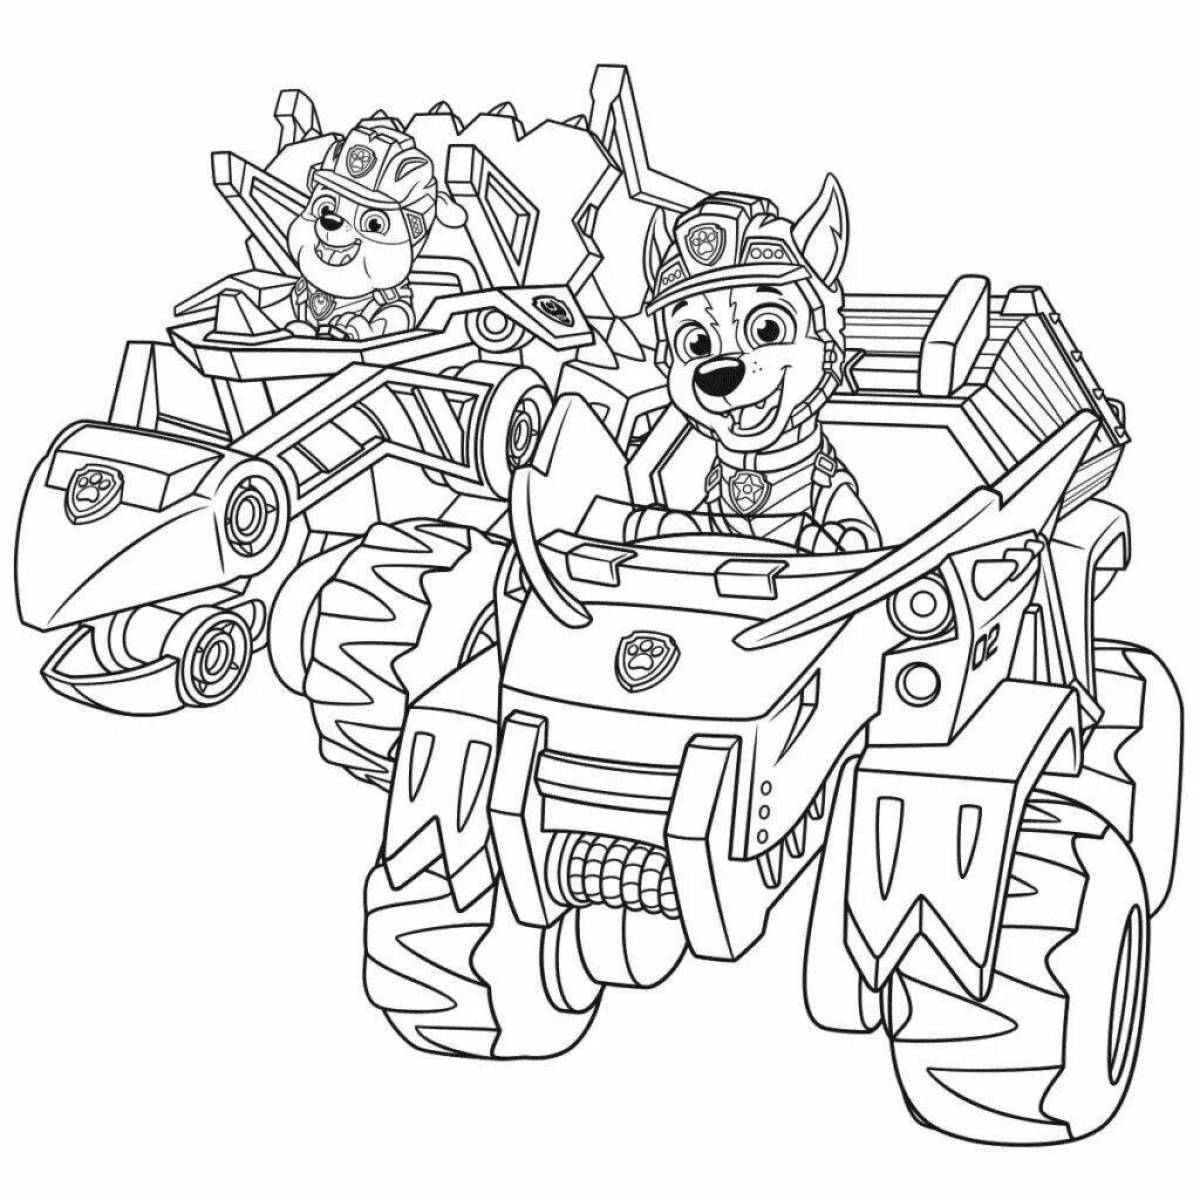 Paw Patrol Outstanding Mega Racer coloring page